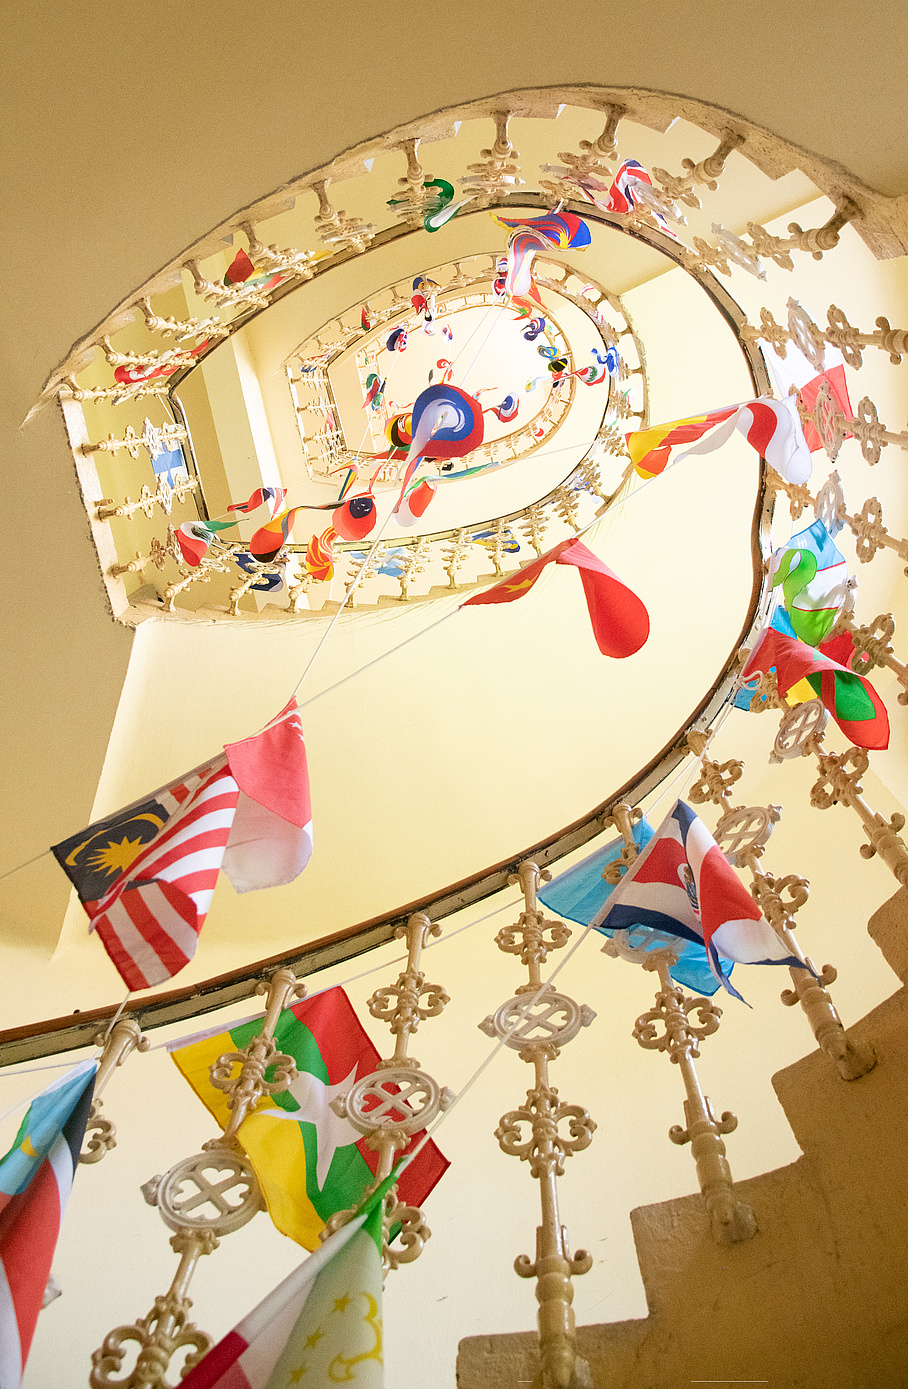 Staircase with national flags from different countries